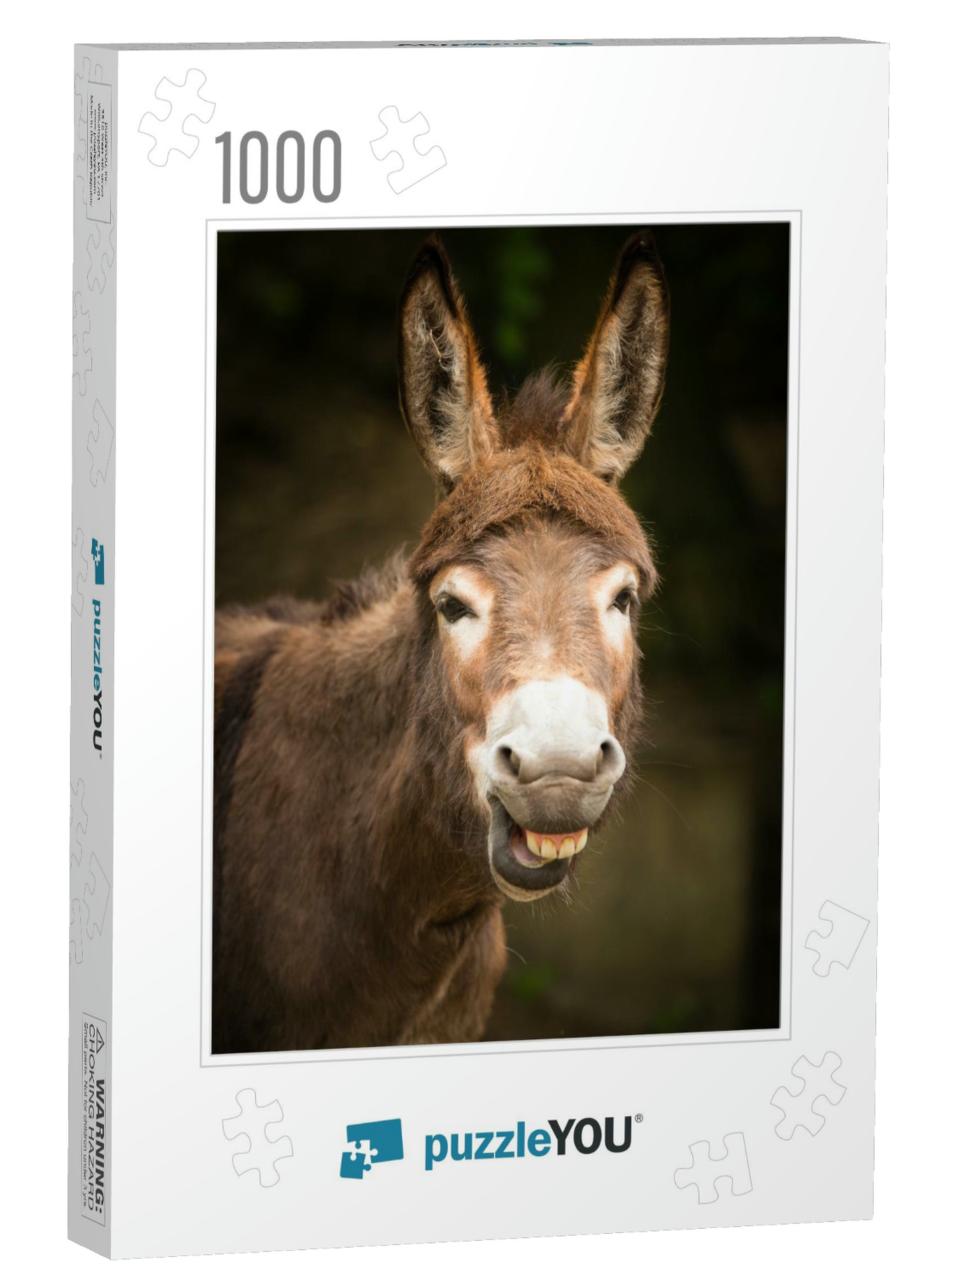 Funny Smiling Donkey... Jigsaw Puzzle with 1000 pieces